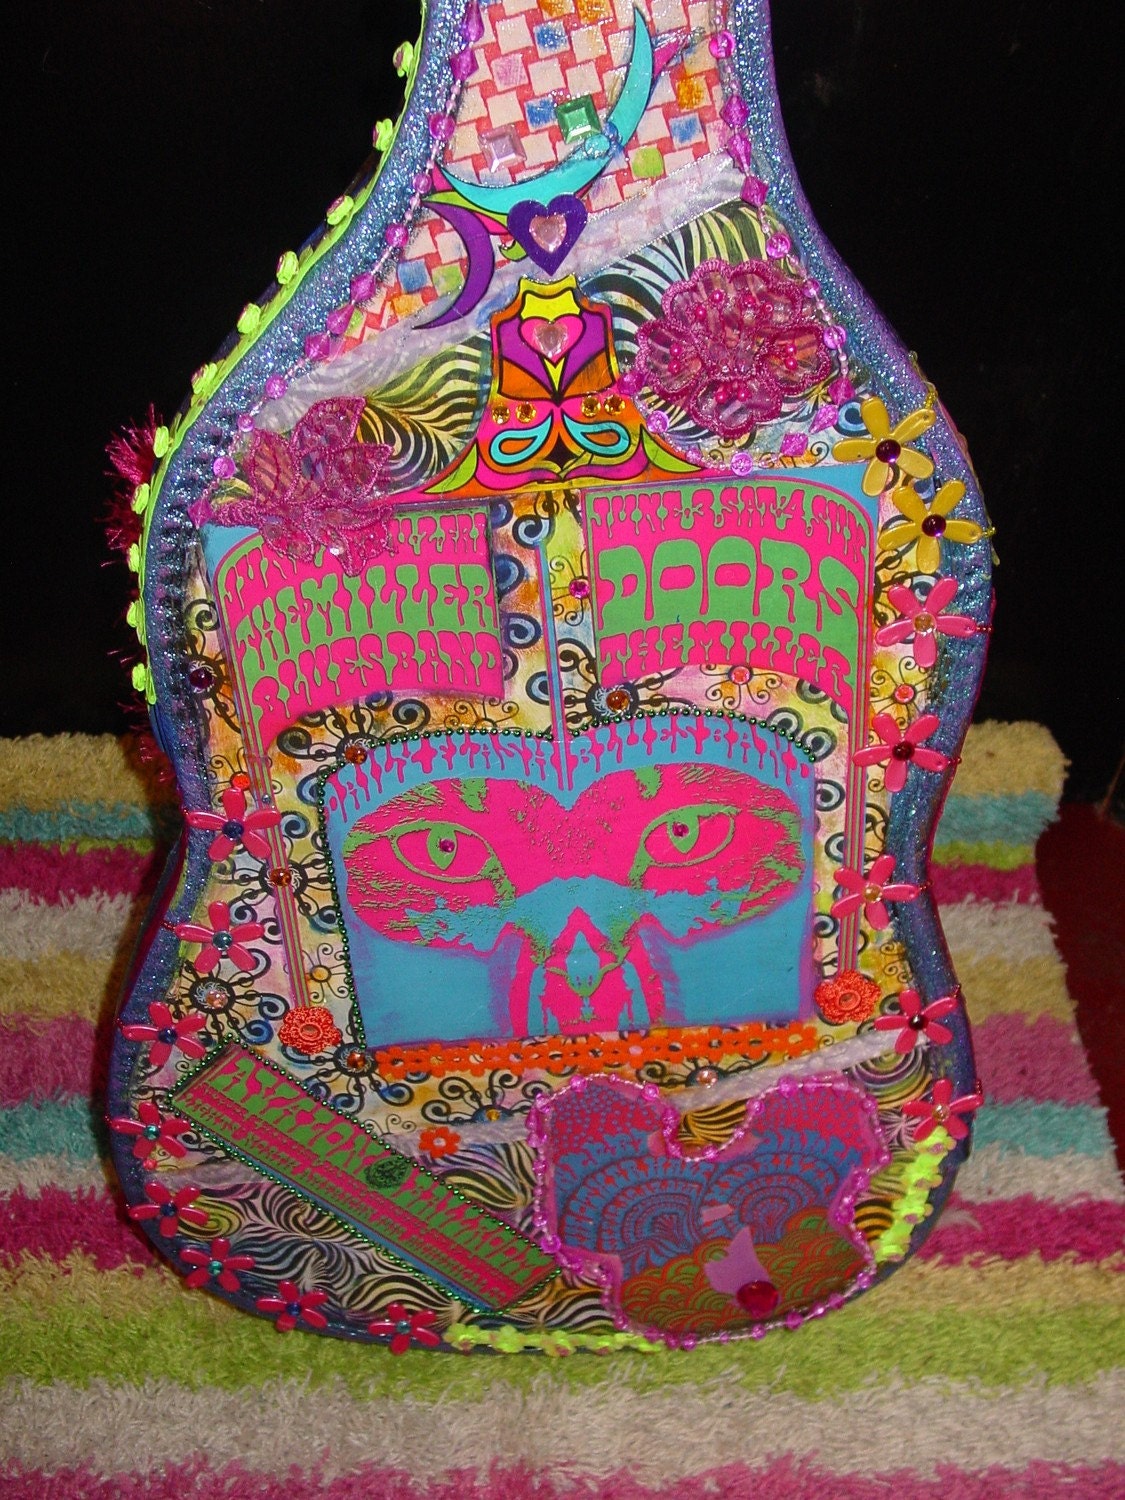 RECYCLED vintage guitar case retro 60s groovy flower power design